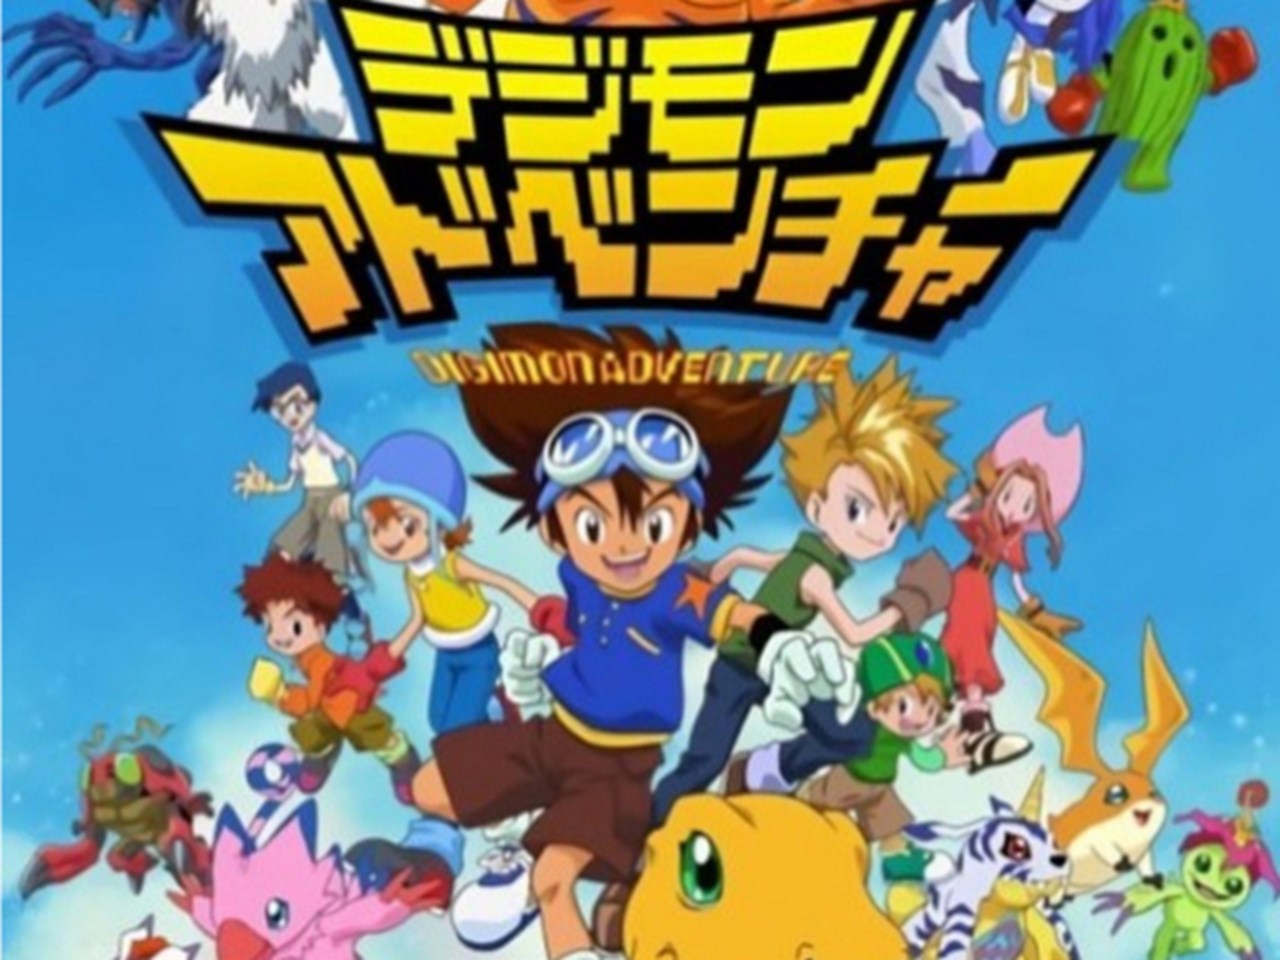 Cartoon Network to premiere anime show 'Digimon Adventure:' in